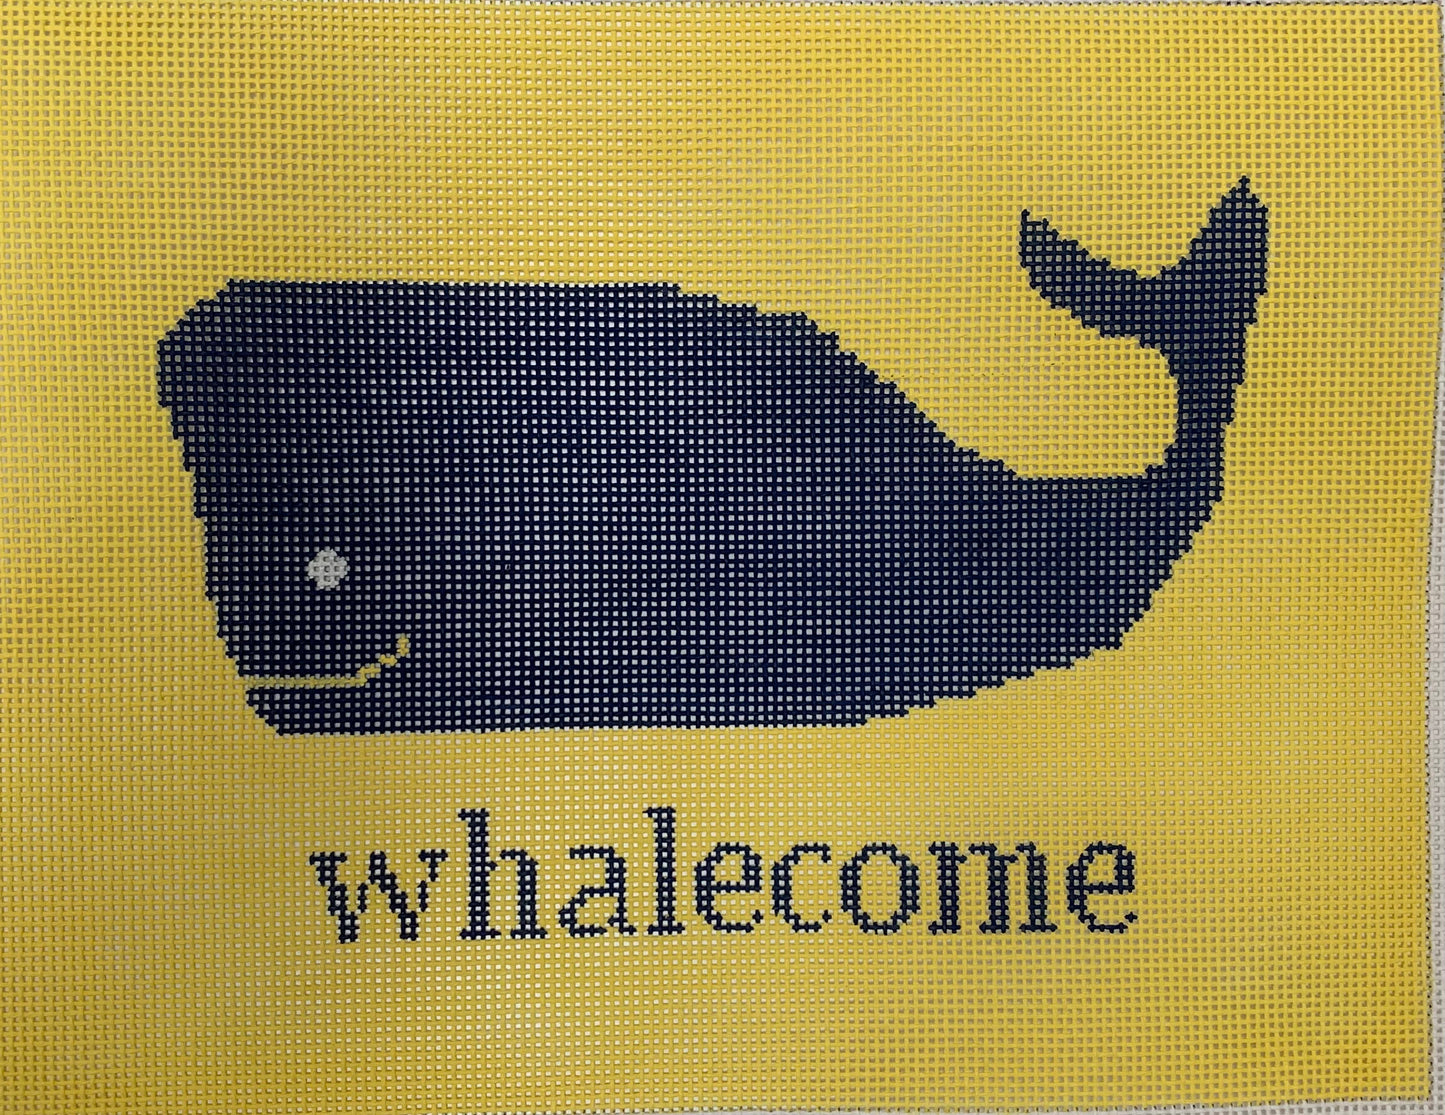 Whalecome on Yellow Needlecraft Canvas